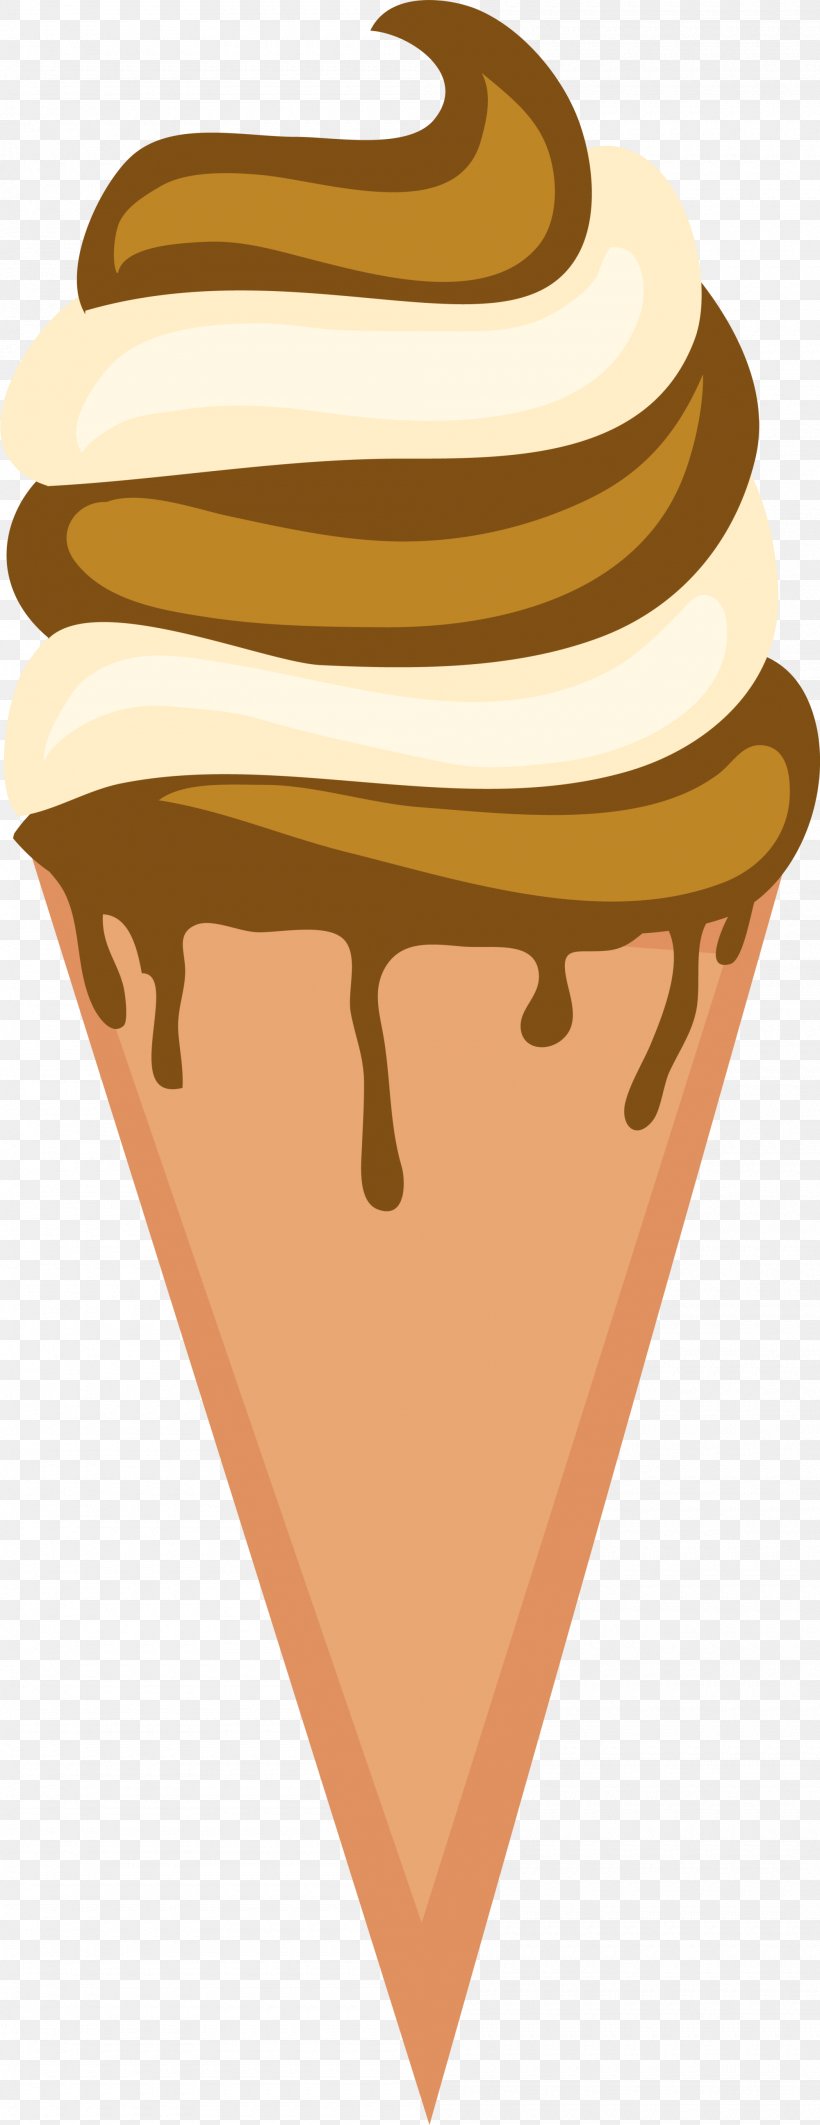 Ice Cream Cone Chocolate Ice Cream, PNG, 2000x5184px, Ice Cream, Chocolate, Chocolate Ice Cream, Cream, Dessert Download Free